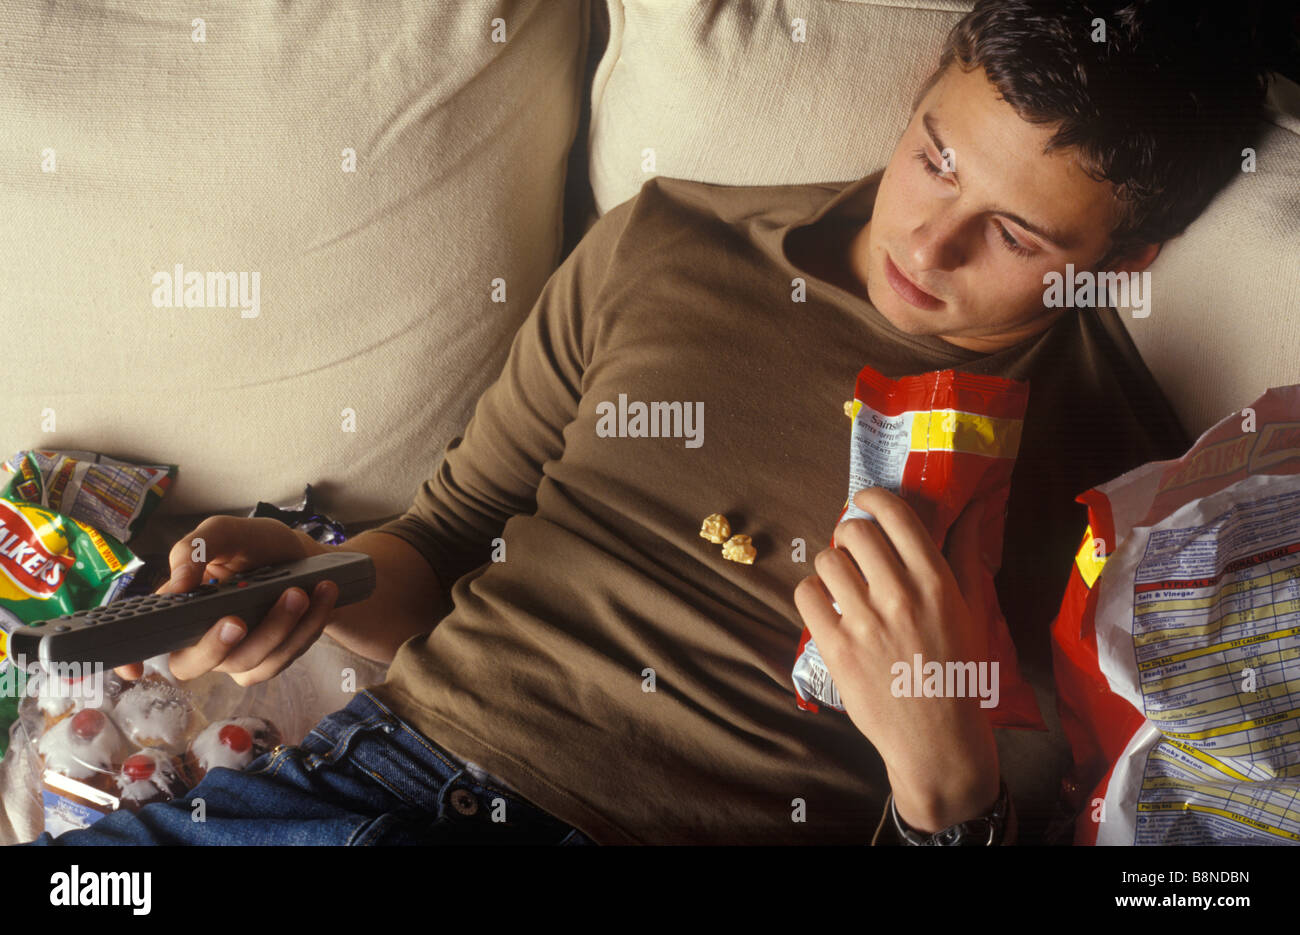 slobbish man lounging on a settee watching television and eating junk food Stock Photo